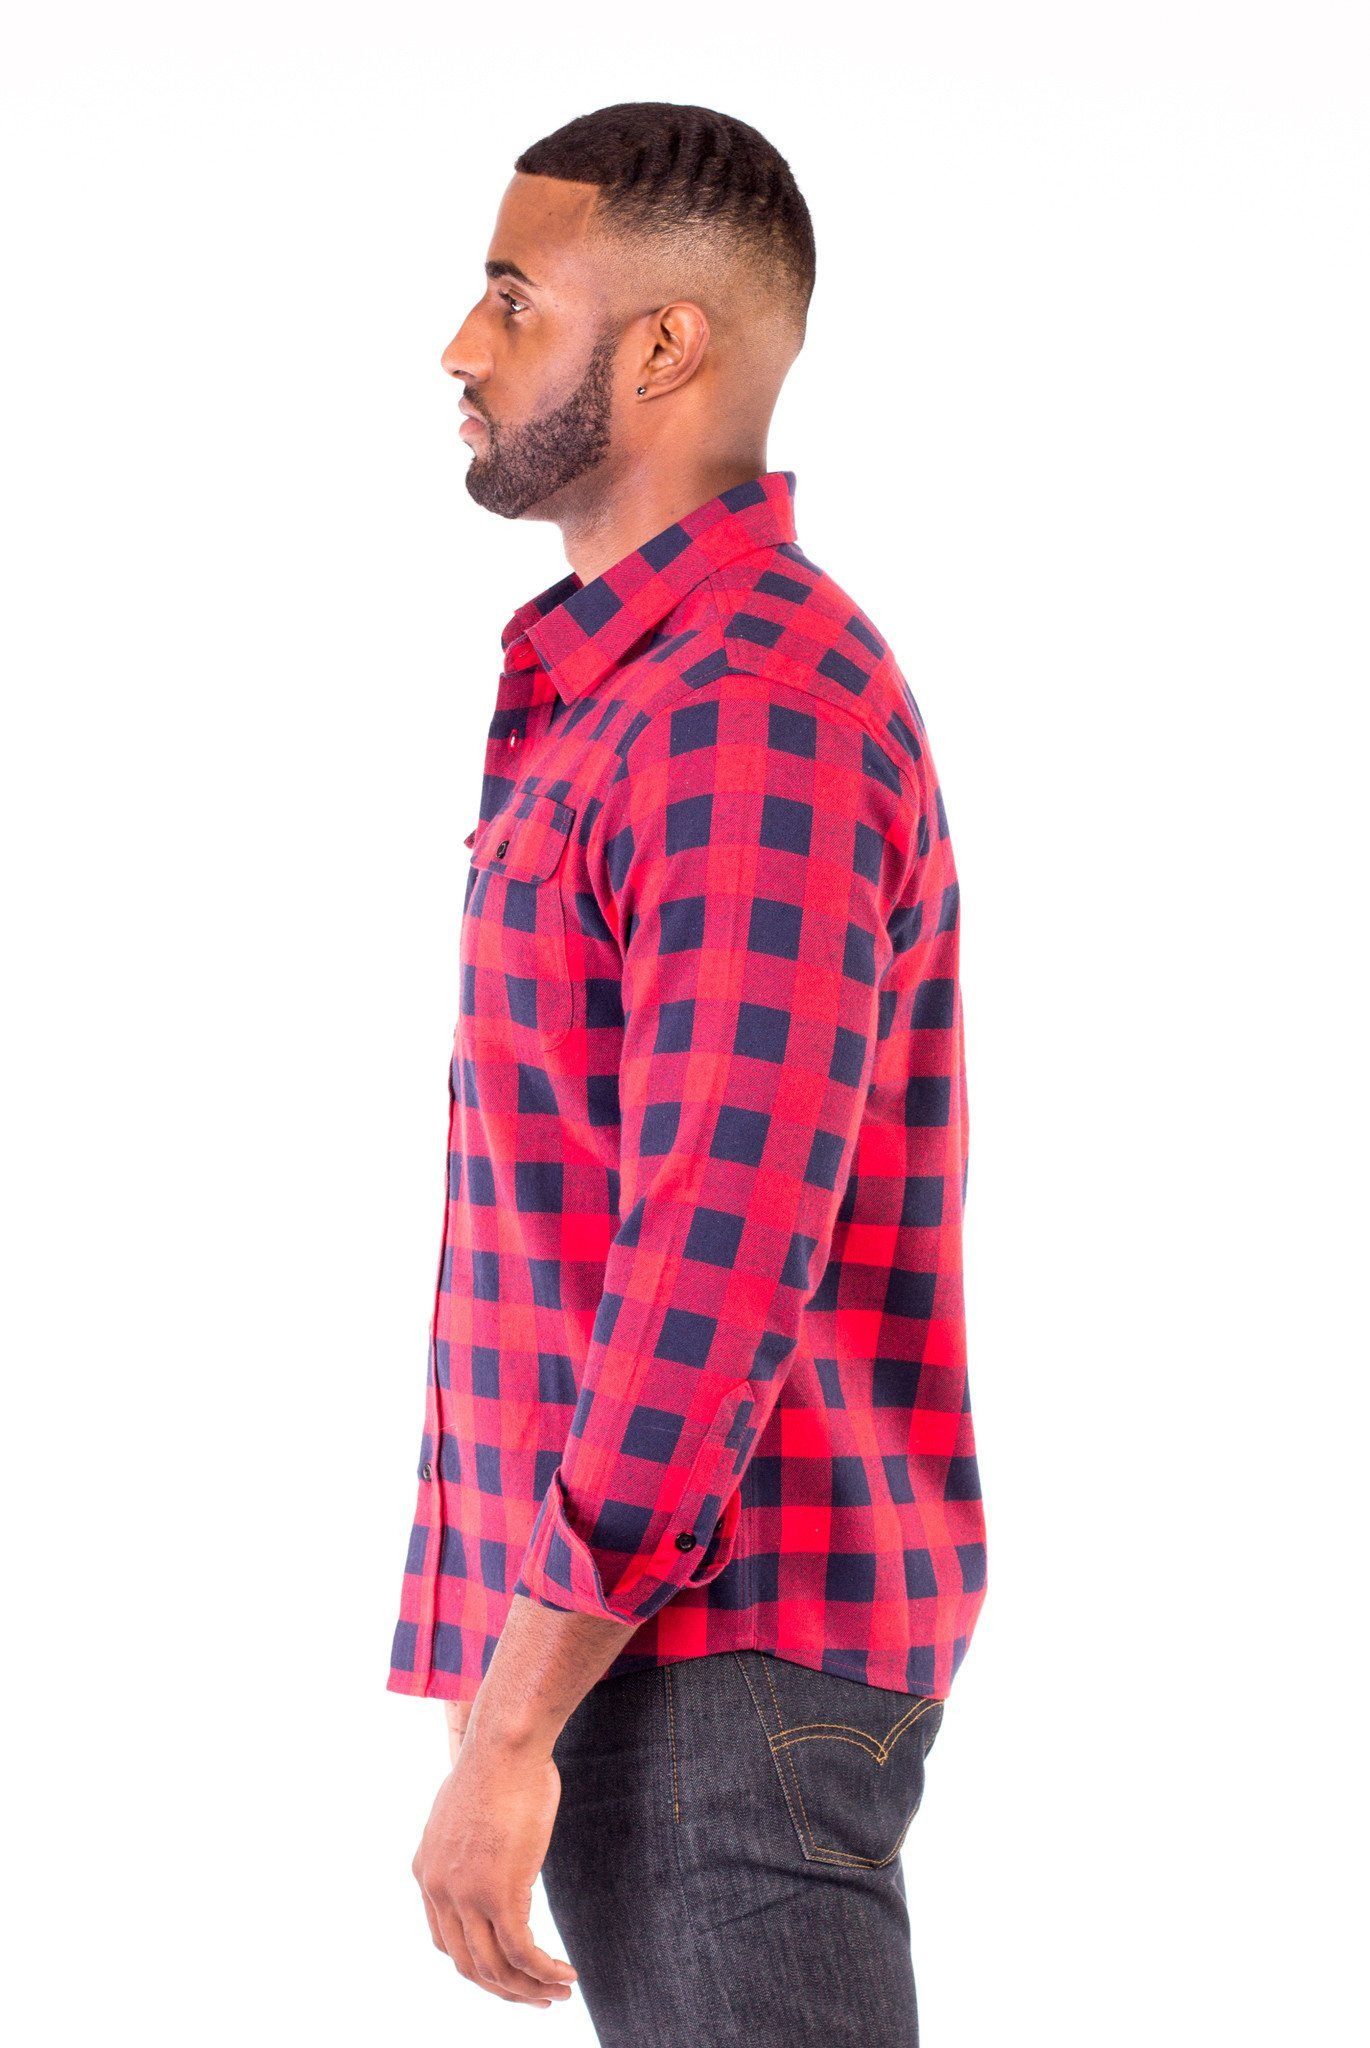 TOMMY RED/BLUE BUFFALO PLAID SHIRT | Poor Little Rich Boy Clothing